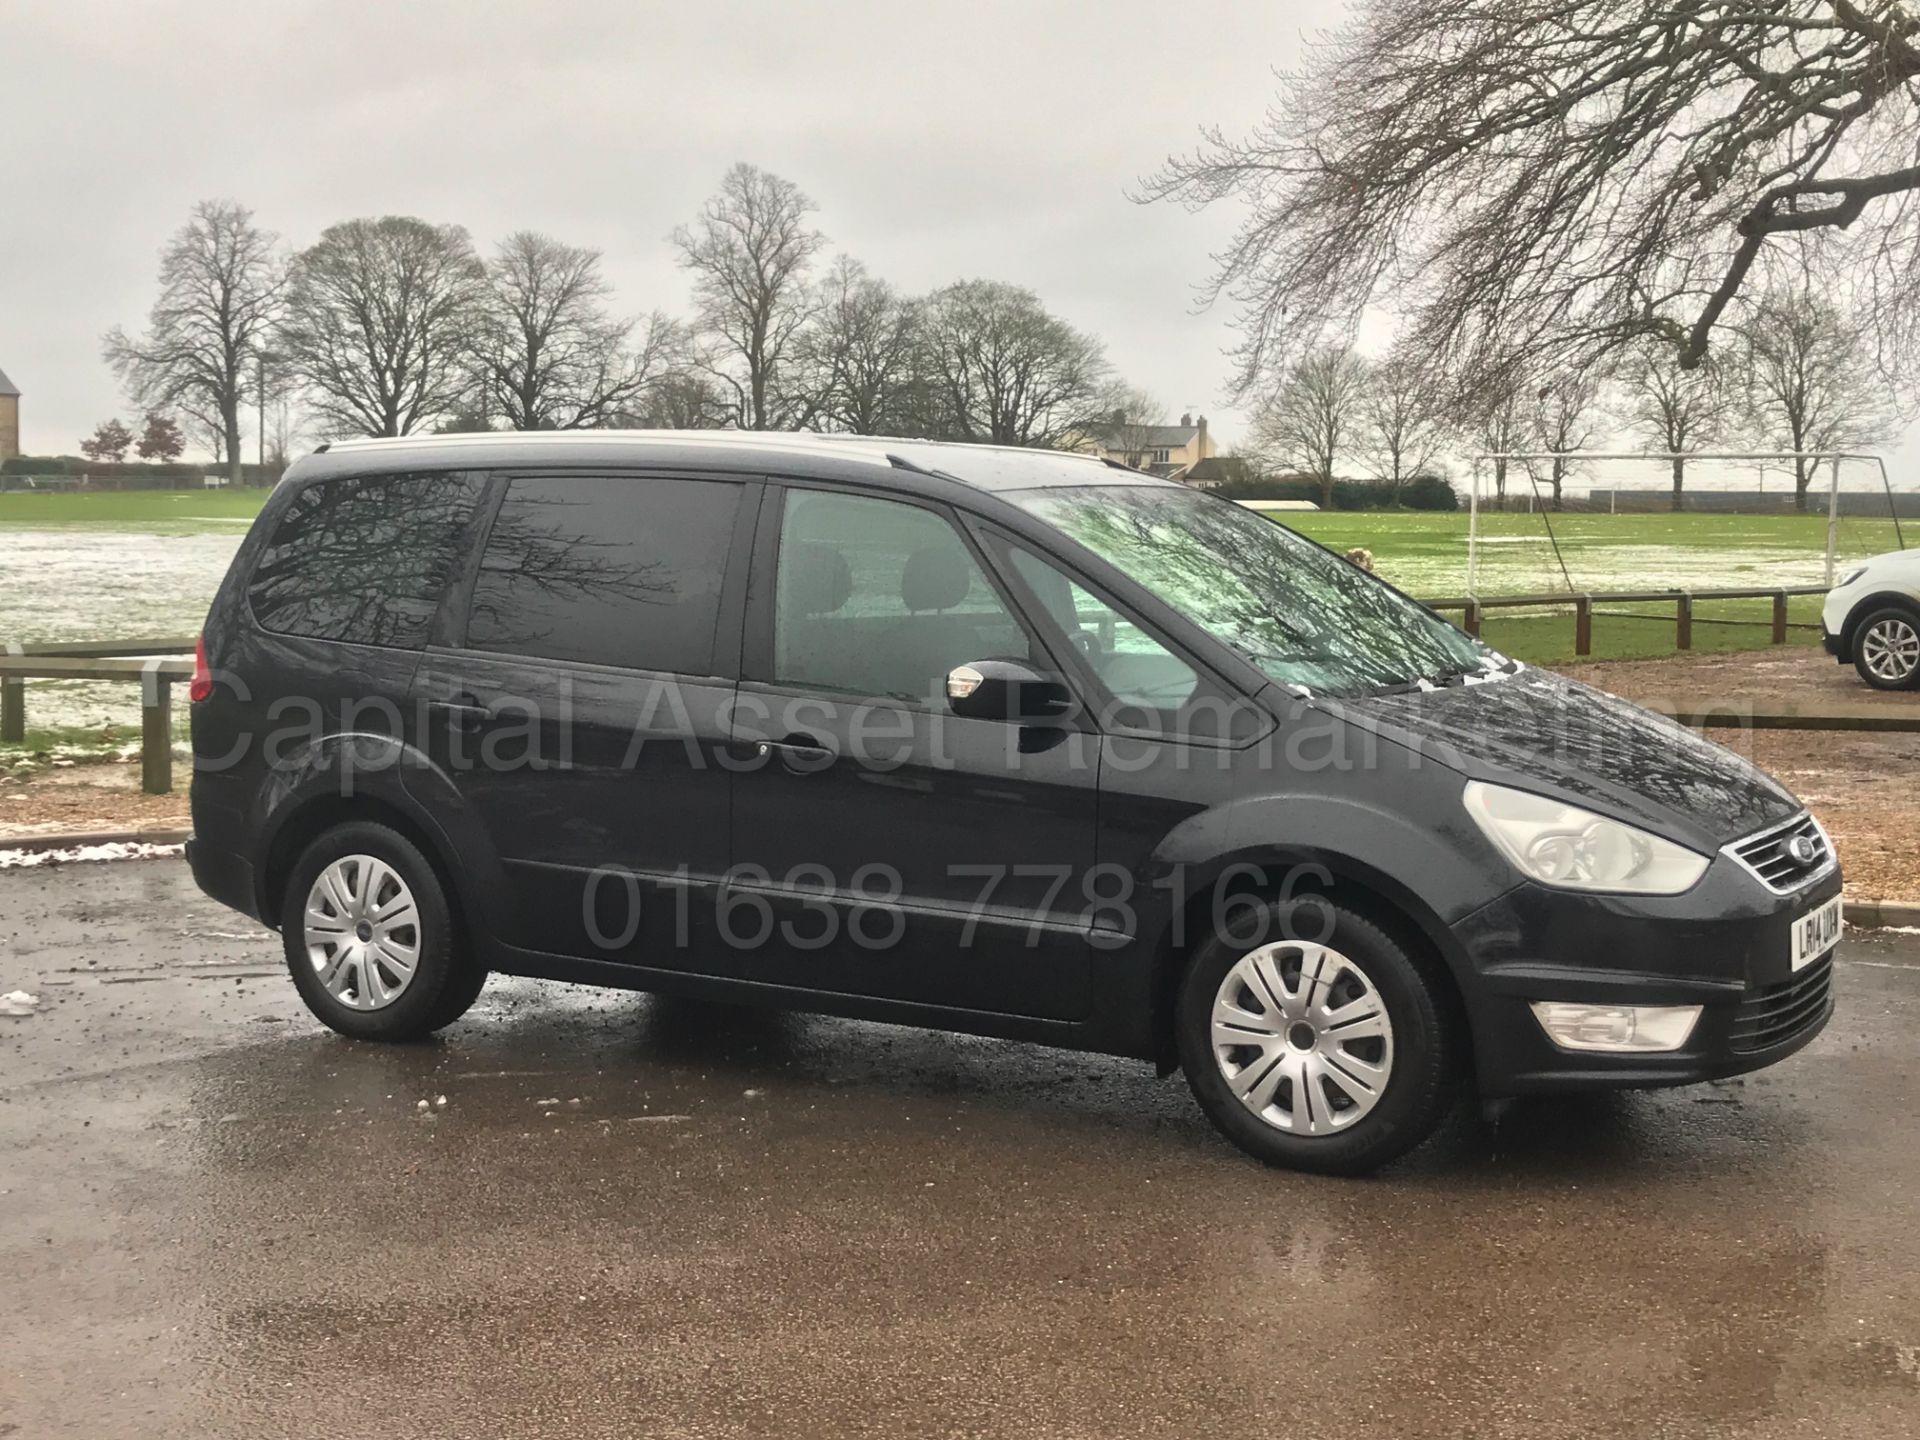 (On Sale) FORD GALAXY 'ZETEC' 7 SEATER (2014 - 14 REG) 2.0 TDCI - 140 BHP - POWER SHIFT (1 OWNER) - Image 10 of 30